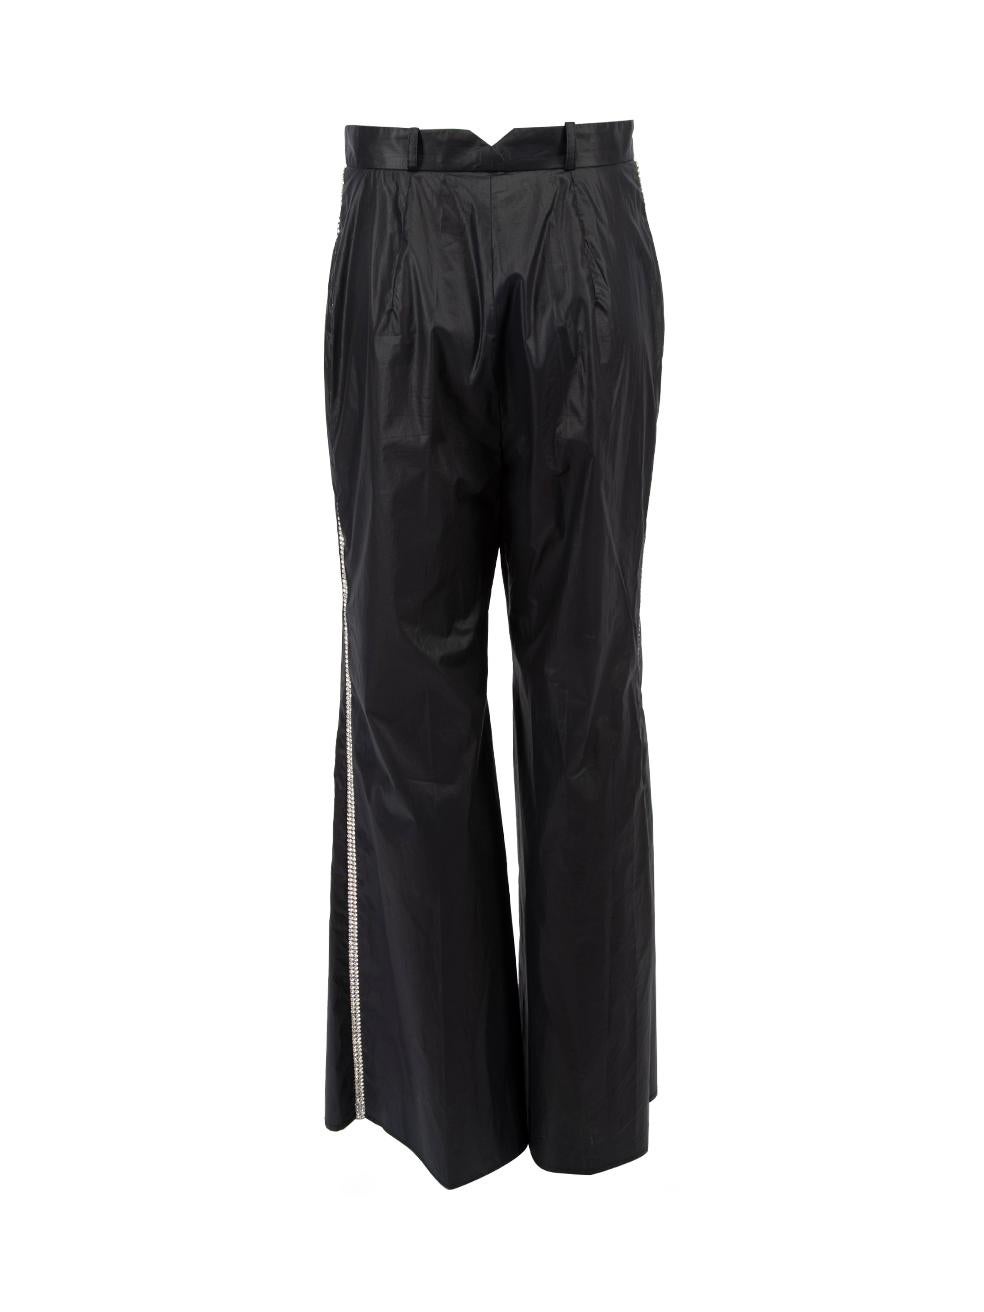 Pre-Loved Christopher Kane Women's Black Trousers with Diamanté Detail In Excellent Condition For Sale In London, GB